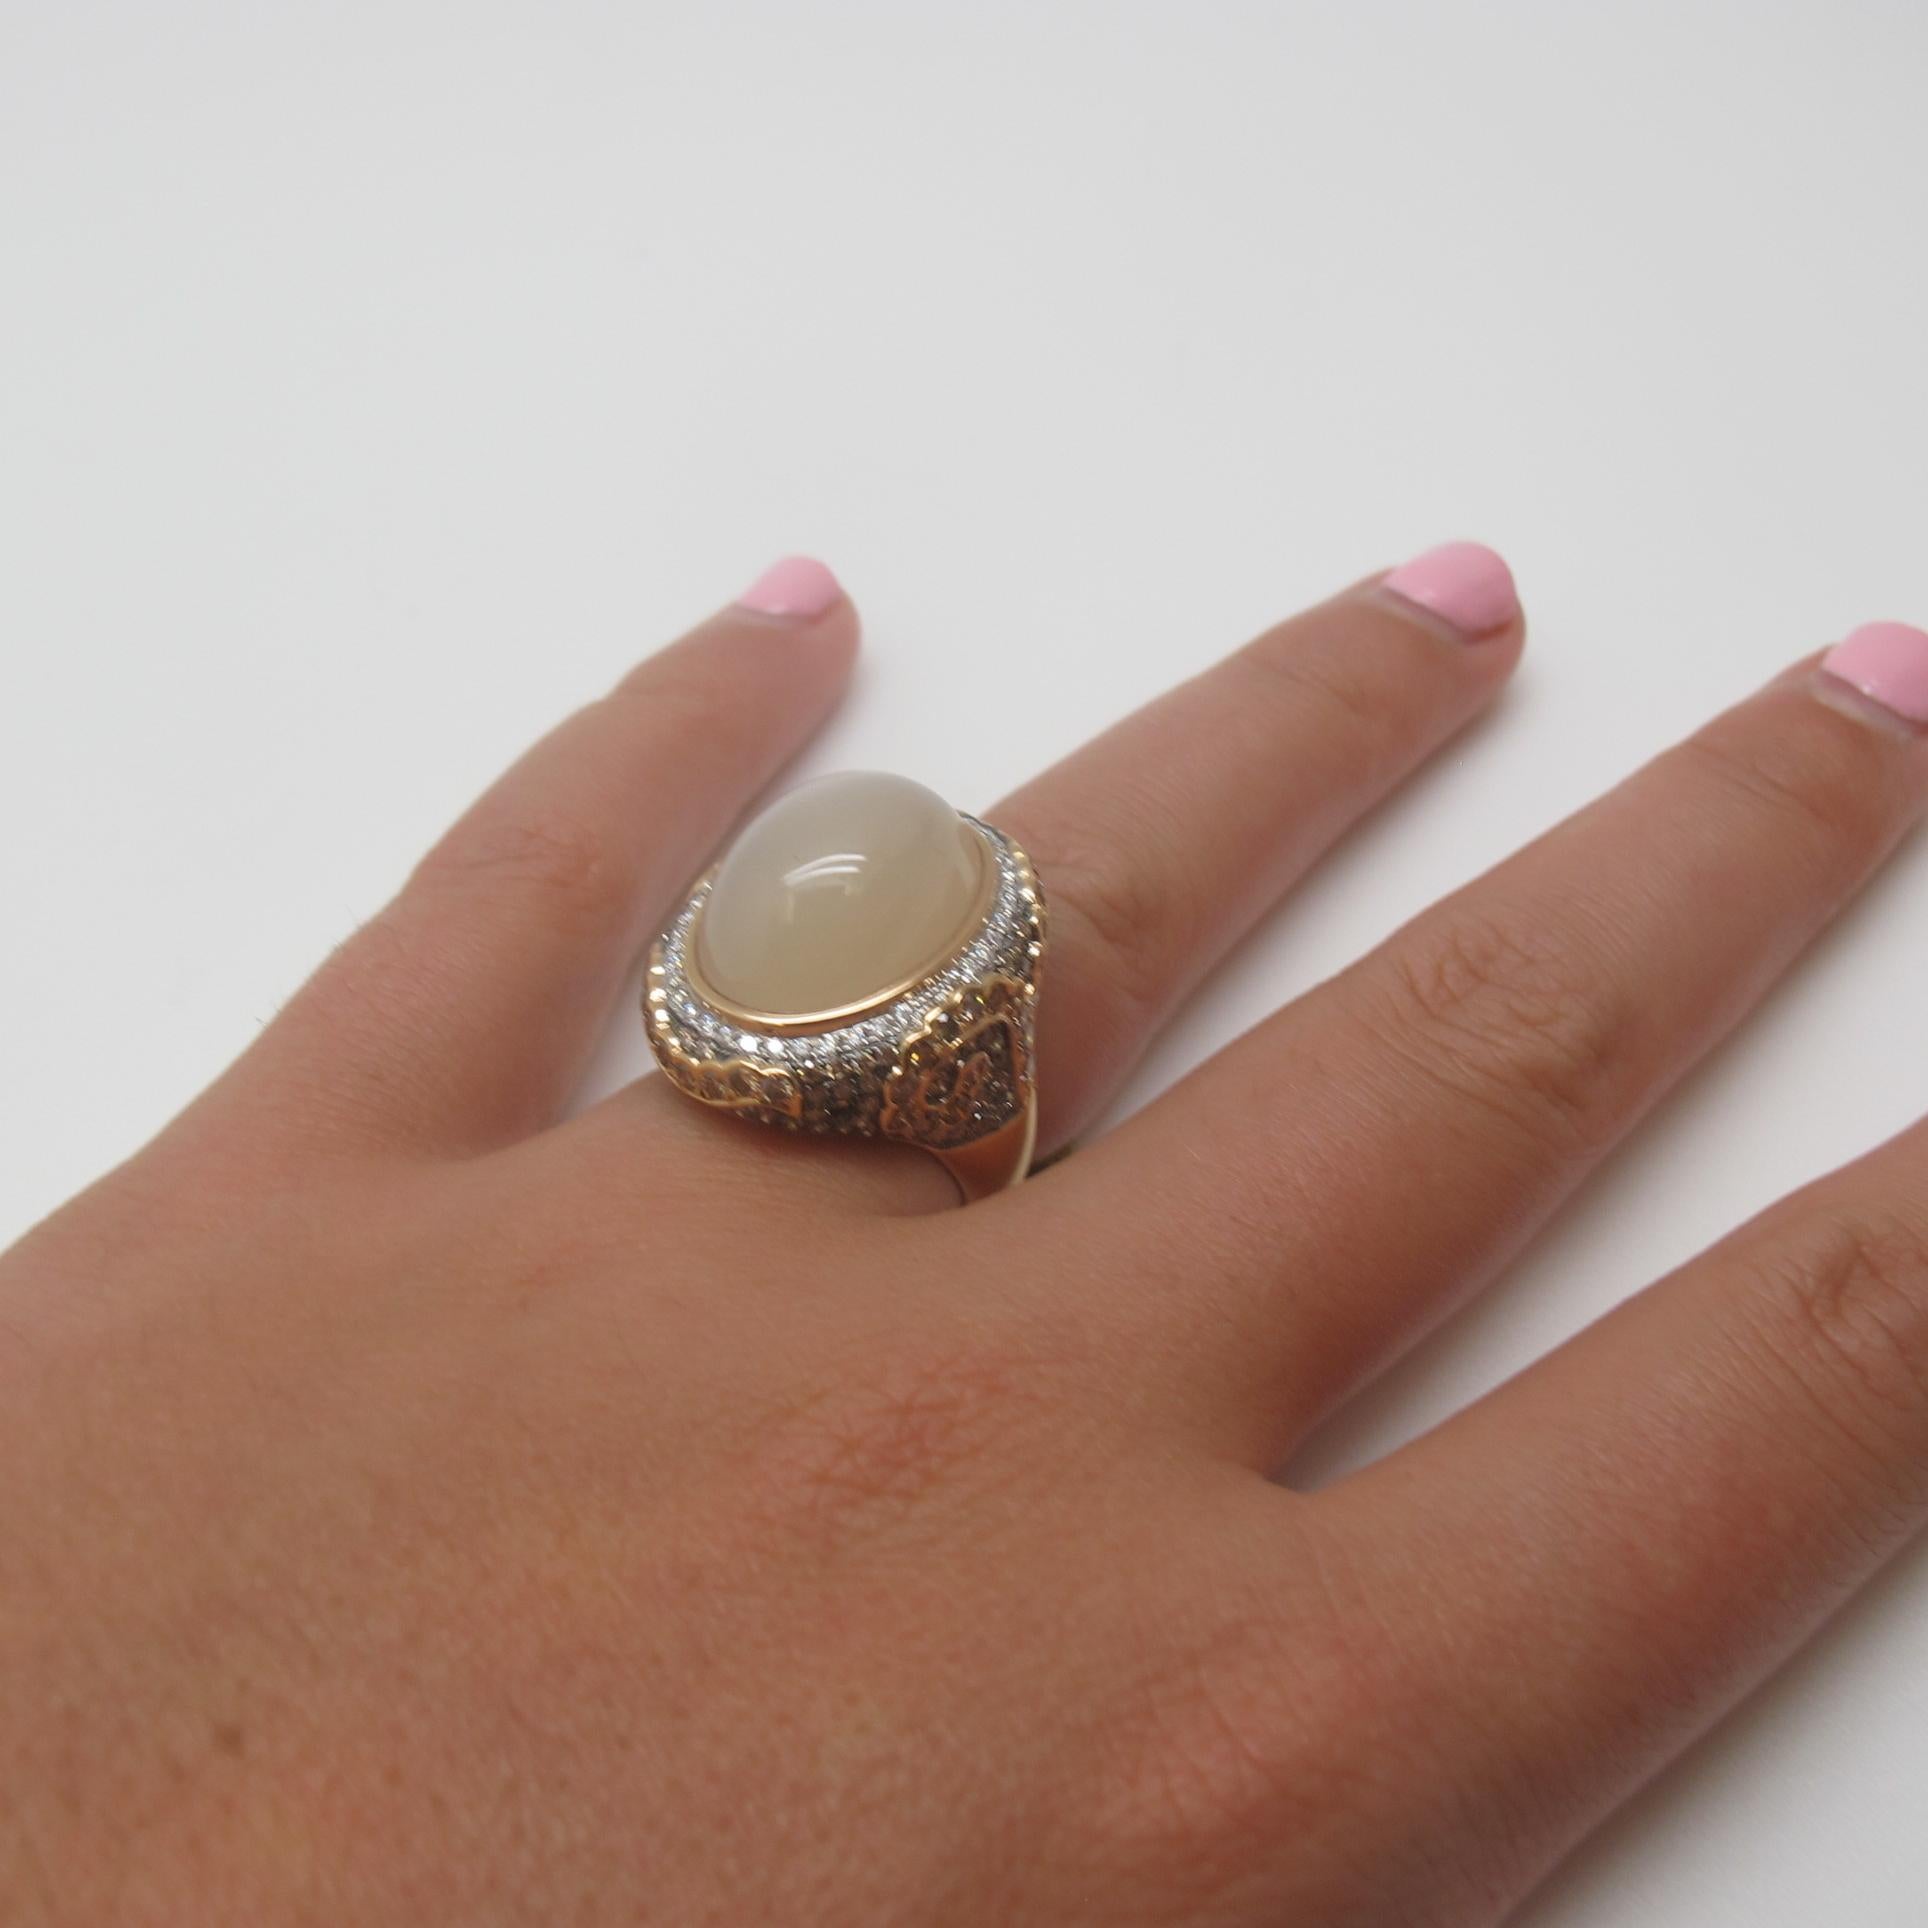 Oval Cut 15.05 Carat Oval Moonstone with White and Brown Diamonds 18 Karat Rose Gold Ring